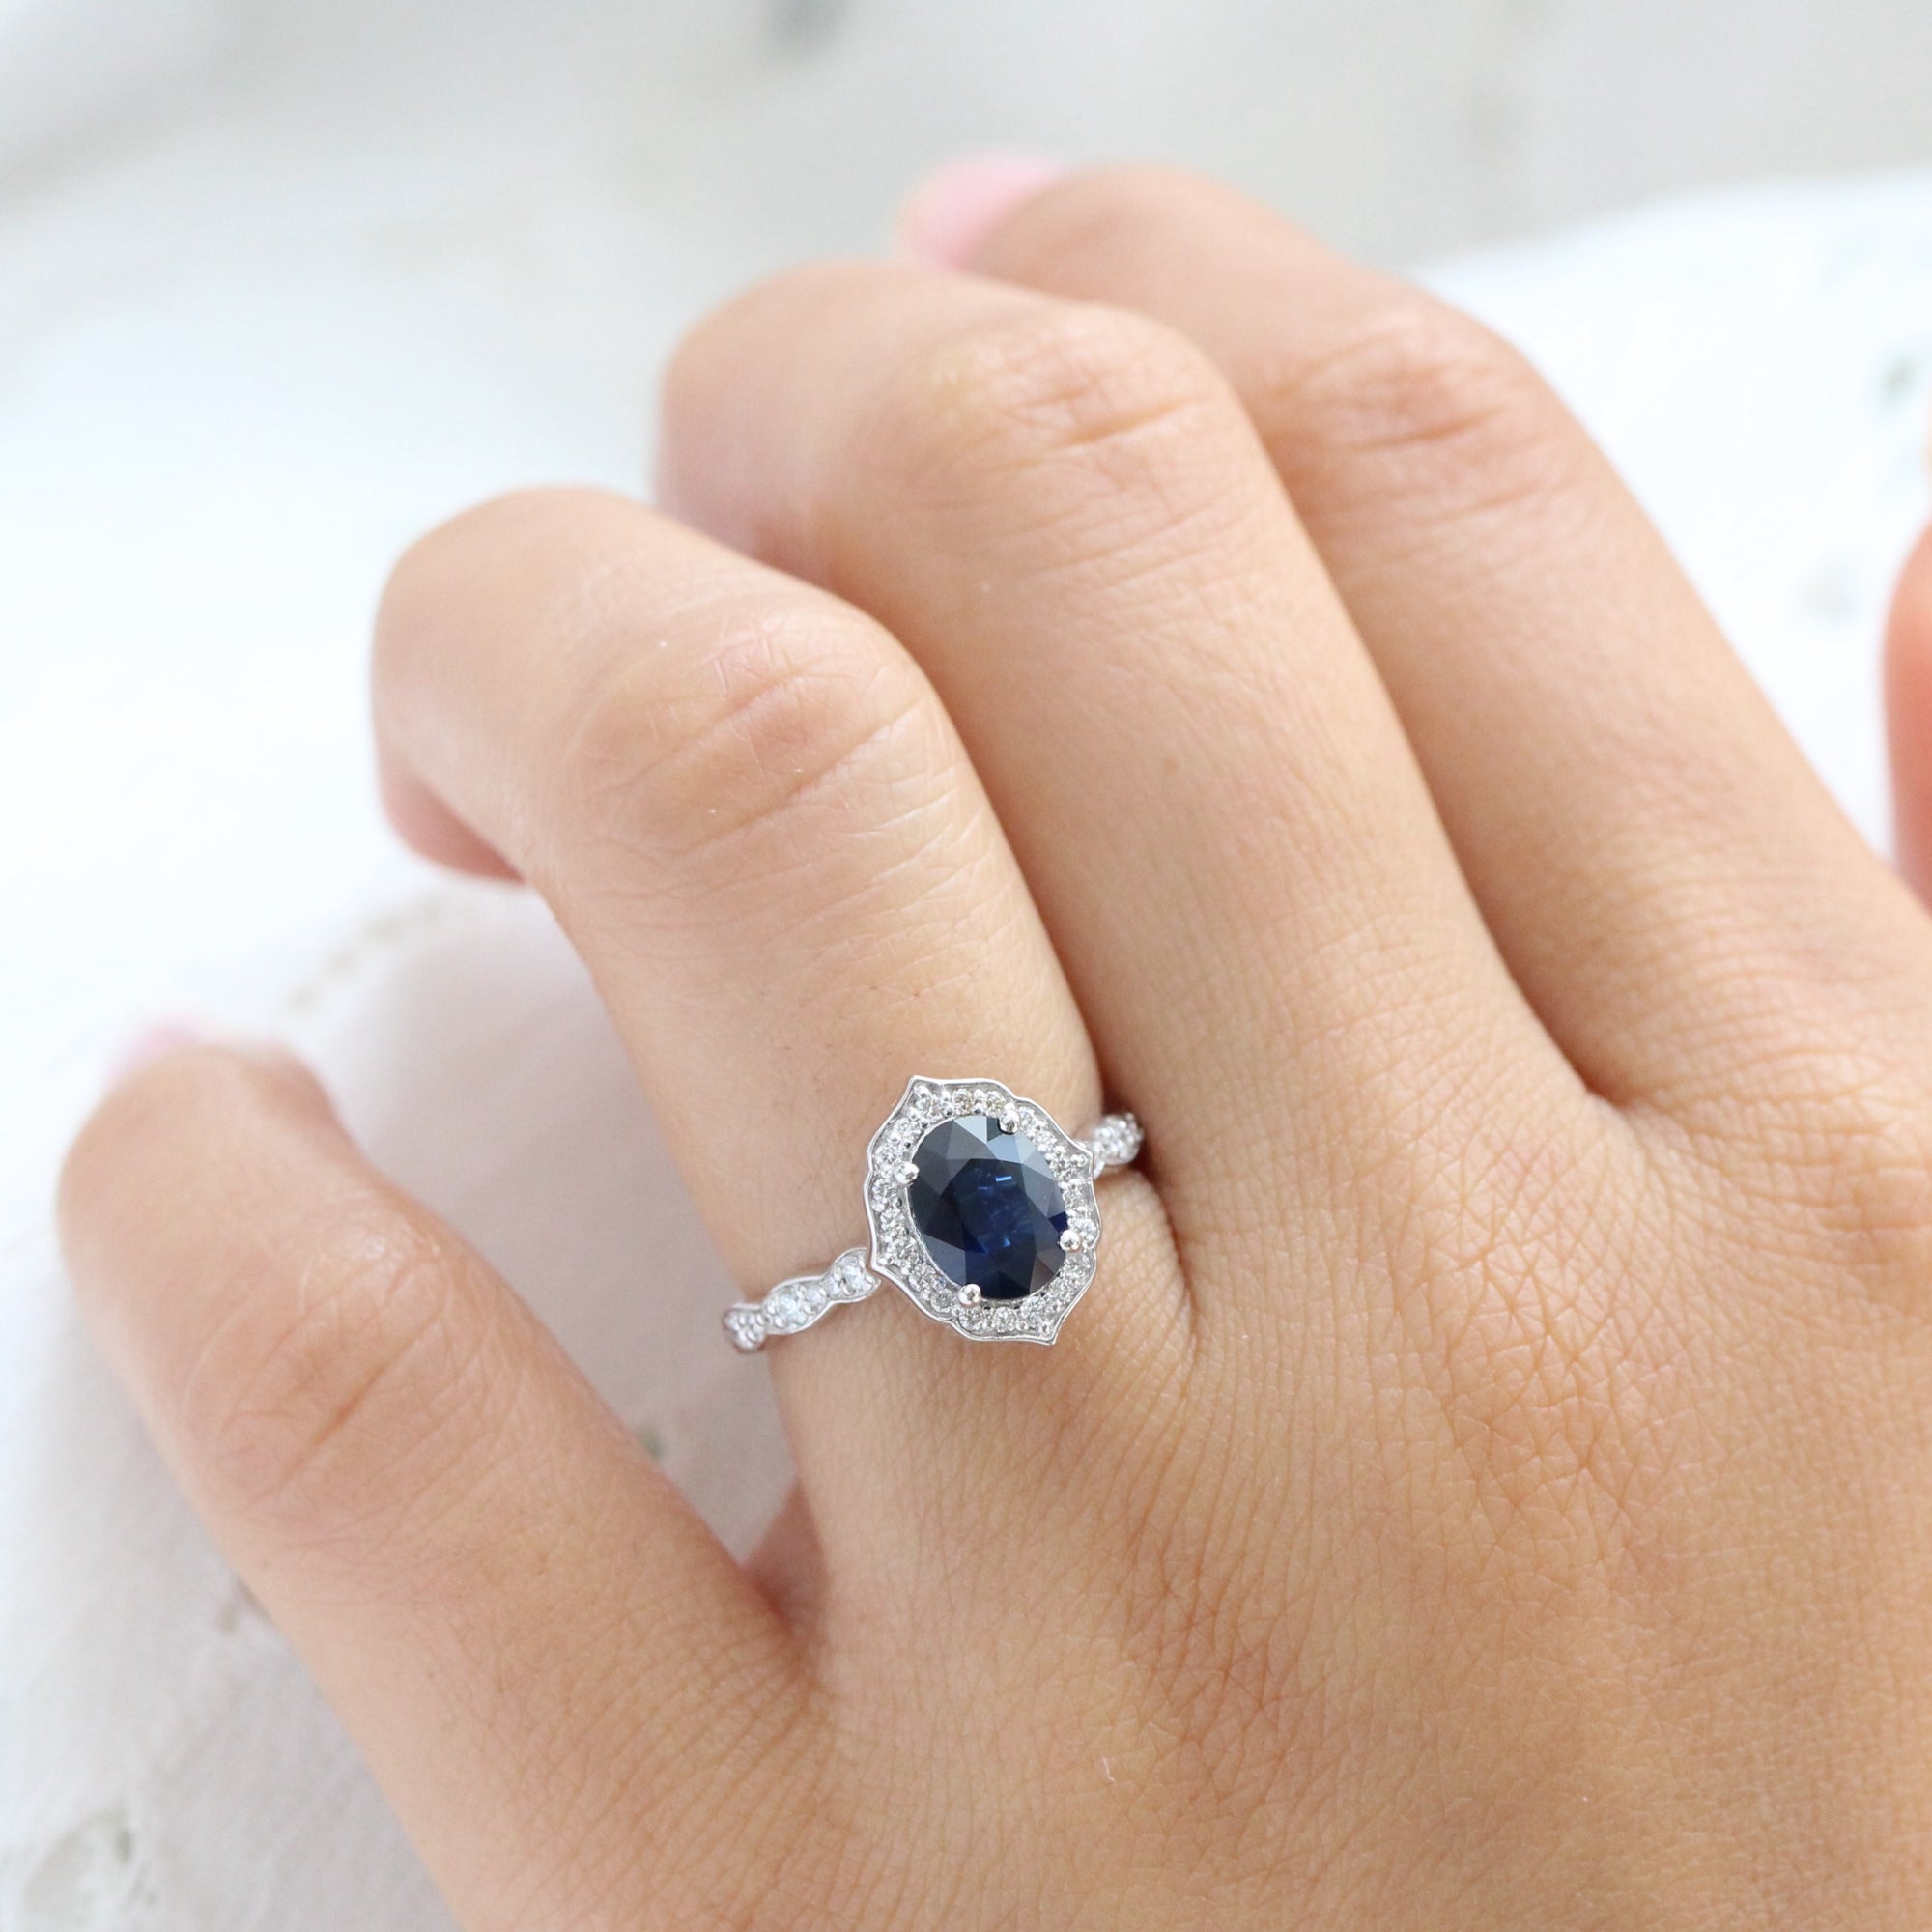 Vintage Floral Natural Sapphire Ring w/ Diamonds in the Scalloped Band